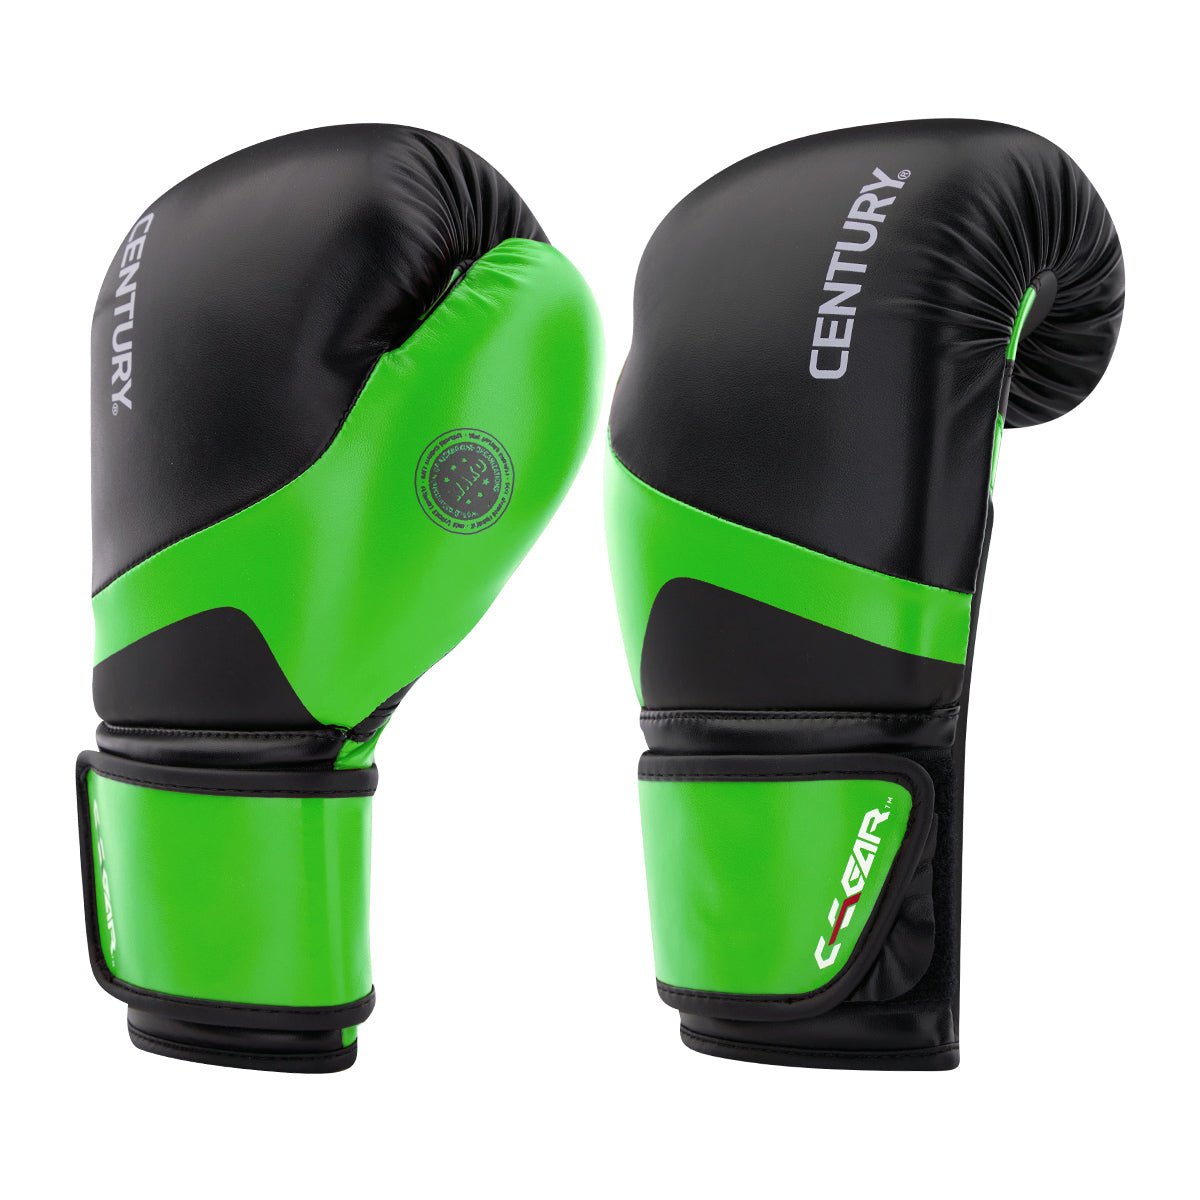 C-Gear Determination Kickboxing Punches